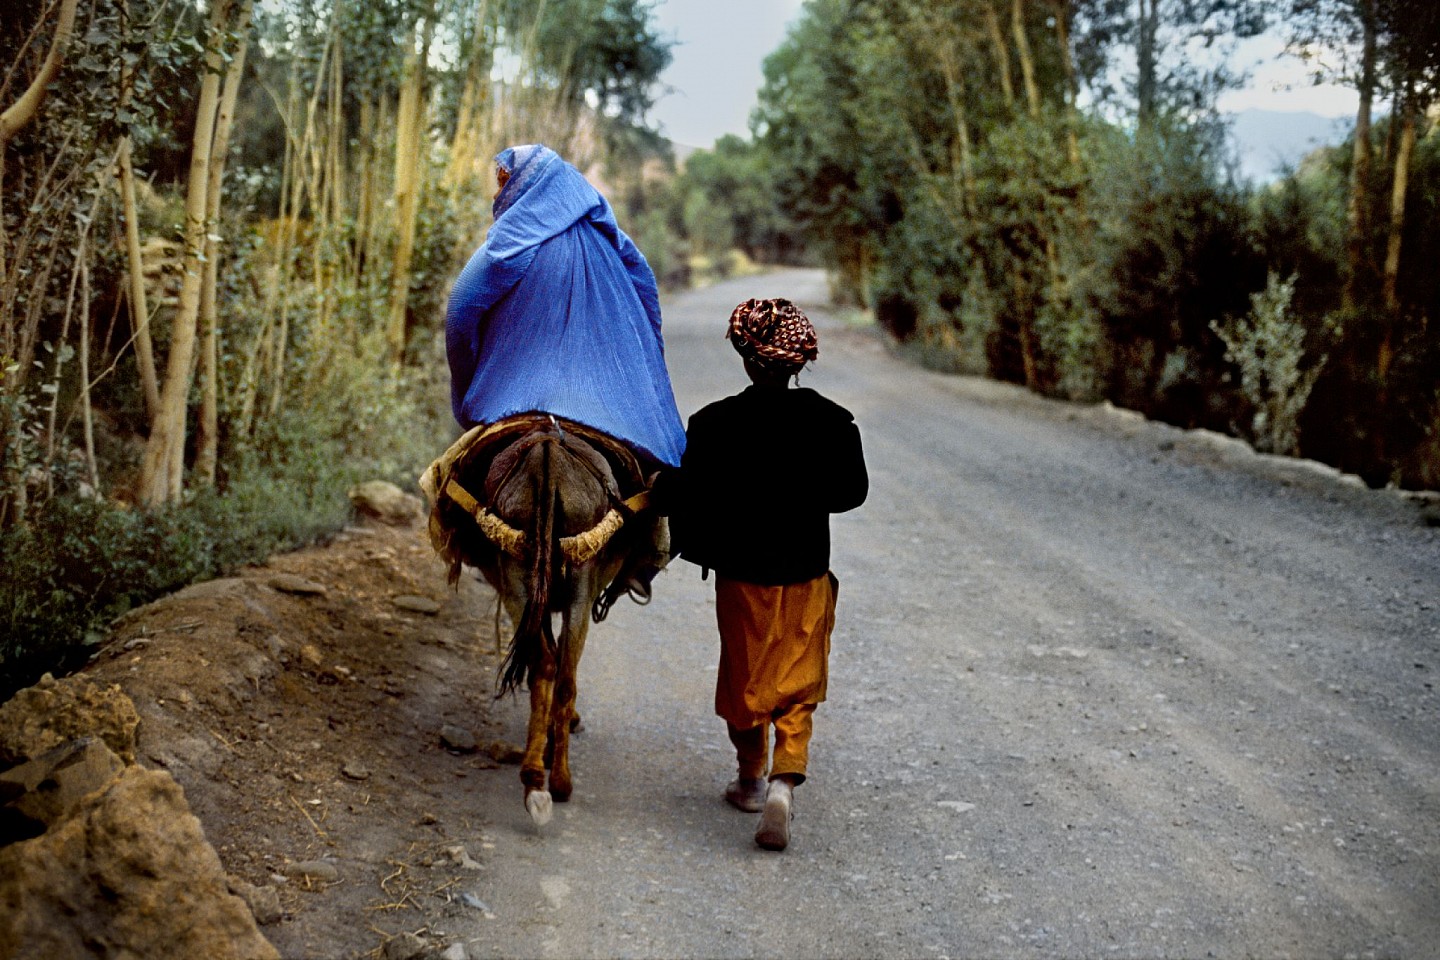 Steve McCurry, Mother and Son Return Home, 2006
FujiFlex Crystal Archive Print
Price/Size on request